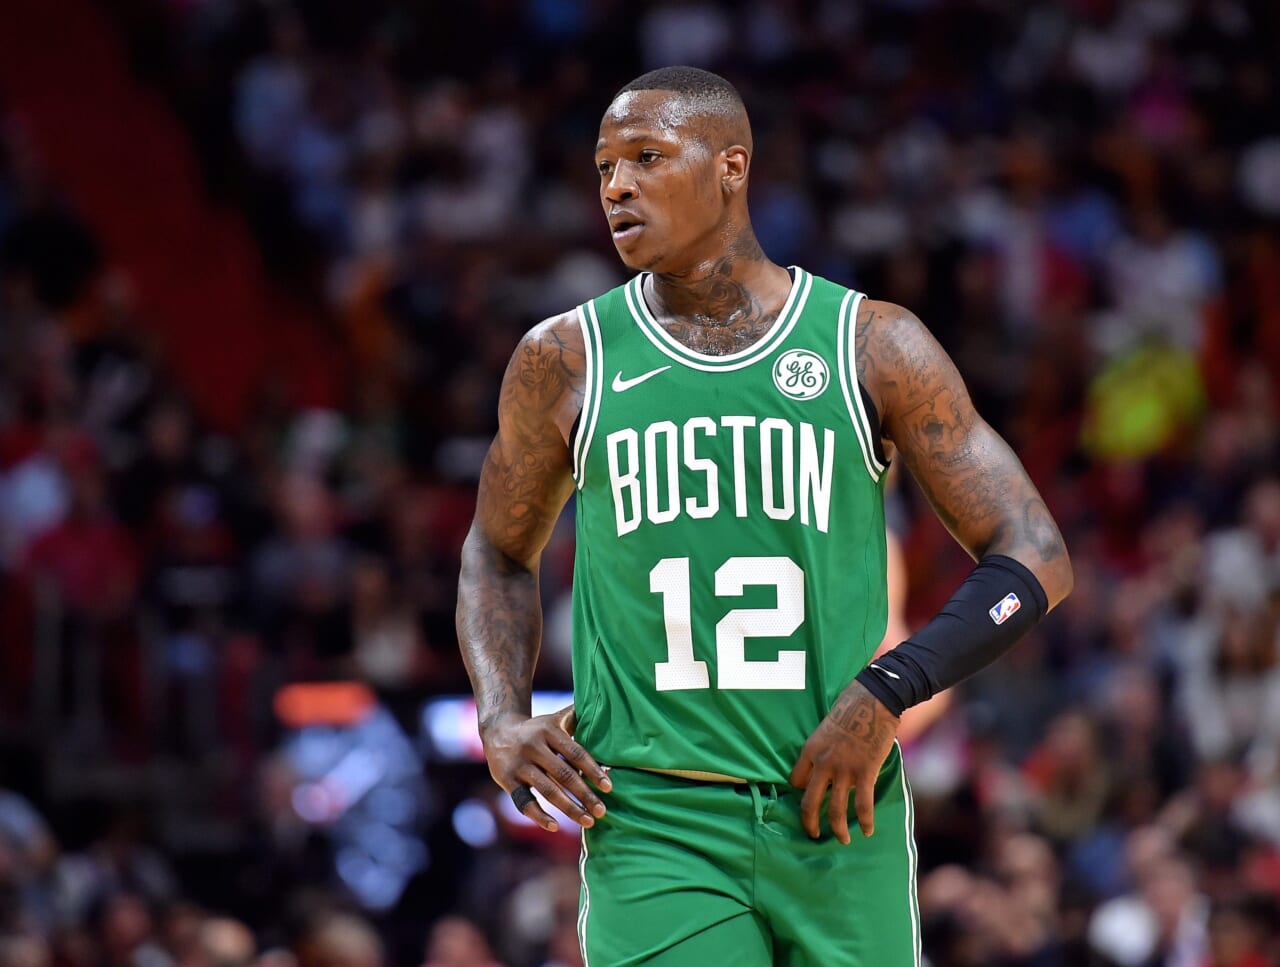 Could the New York Knicks pursue Terry Rozier in free agency?